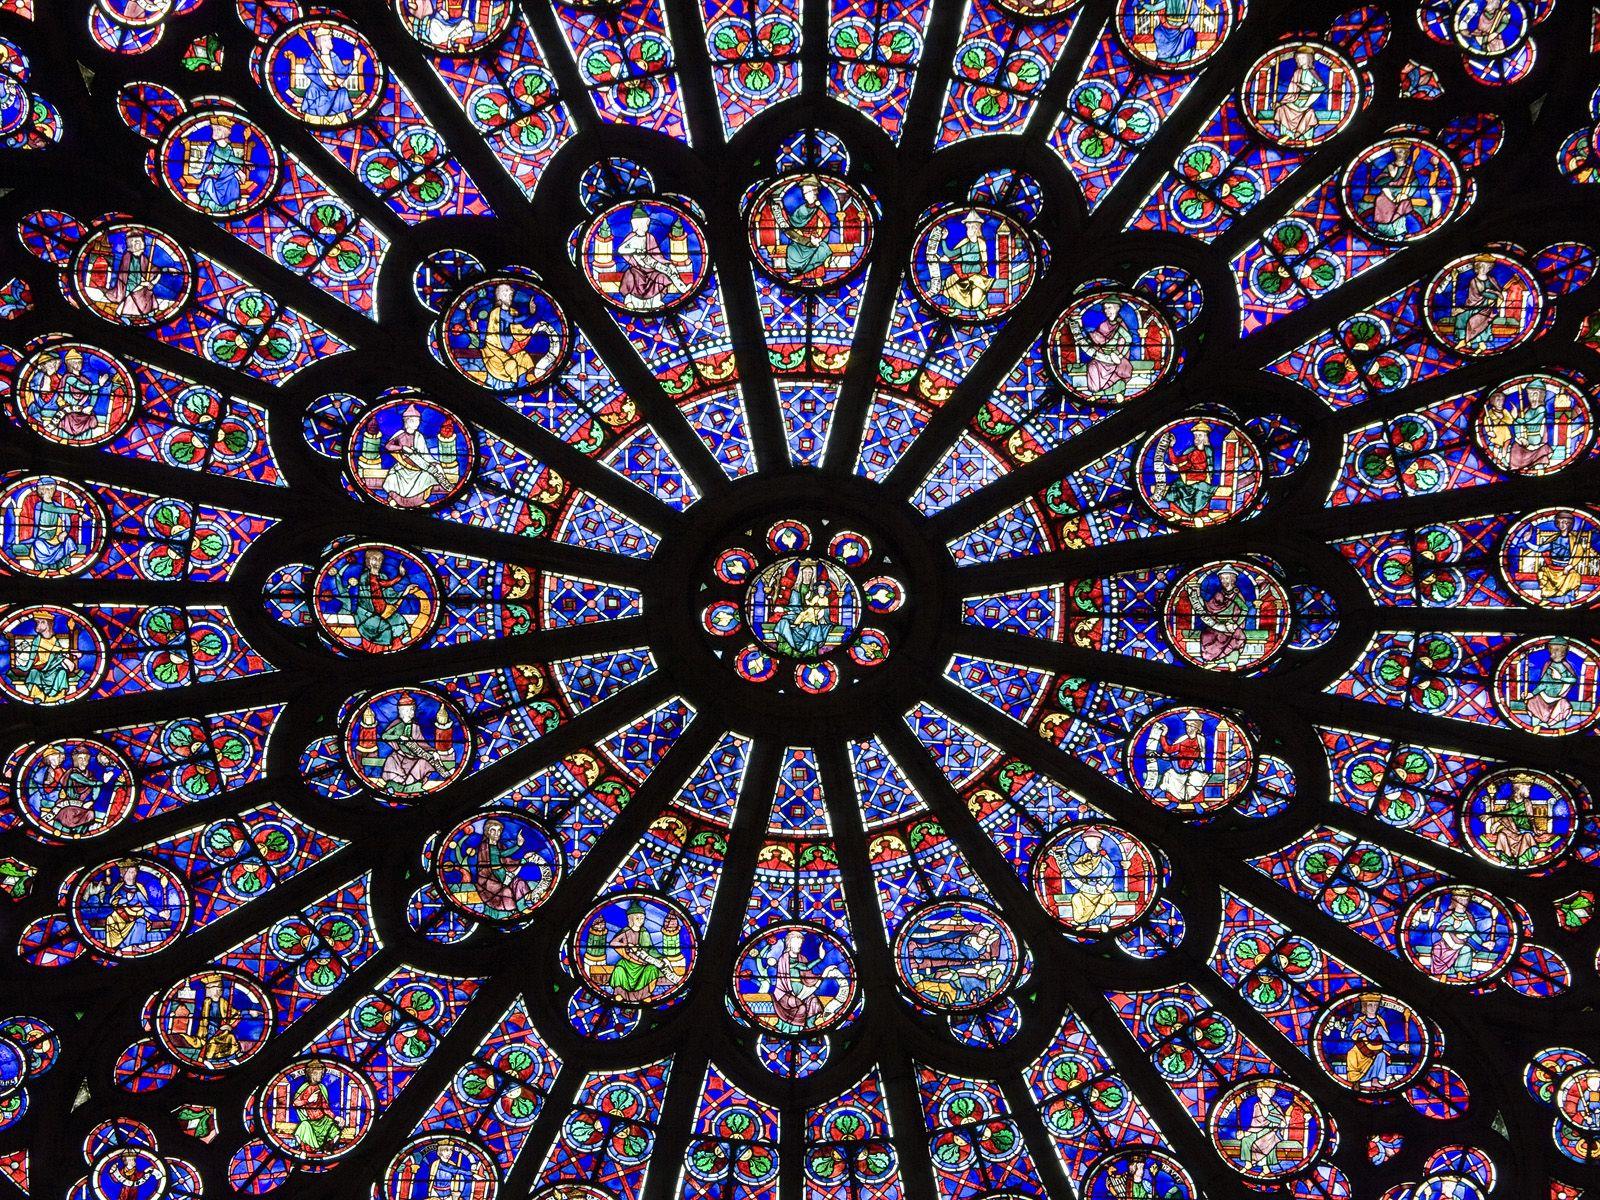 rose window at Notre Dame Cathedral Paris. Girl Scout Day Camp